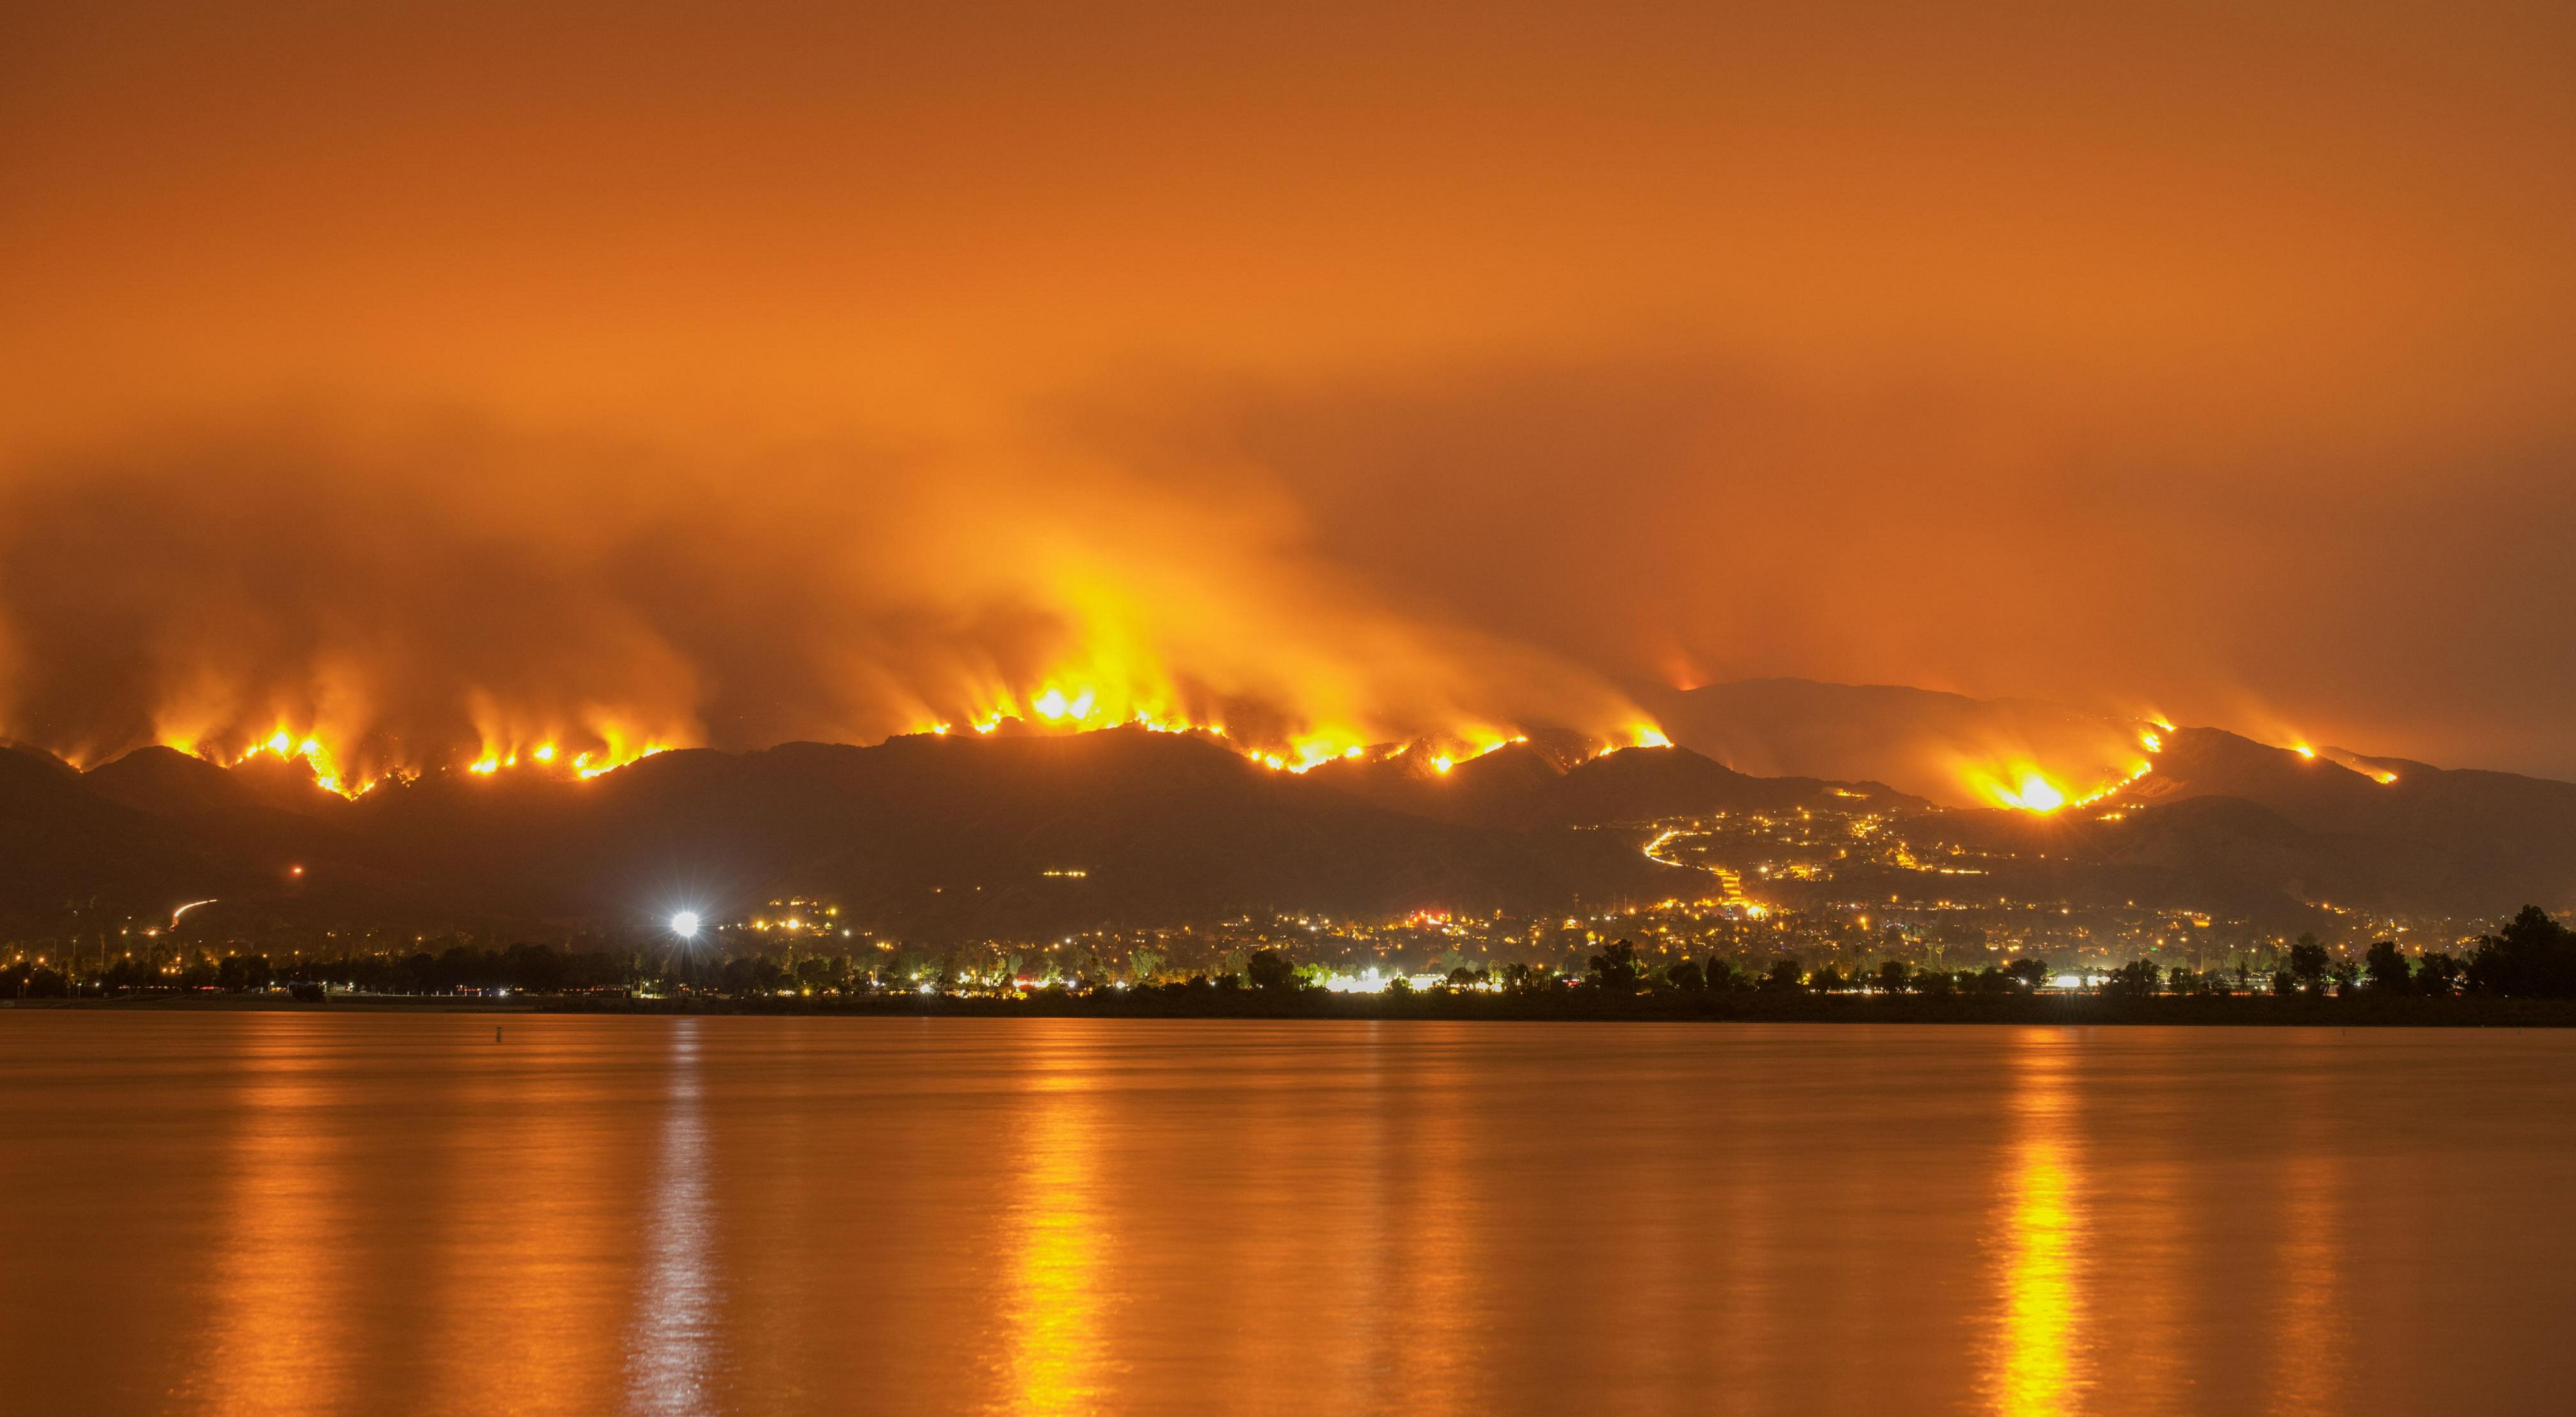 One of the 2018 California wildfires. A glowing orange sky with water in the foreground and flames rising over hills in the background.